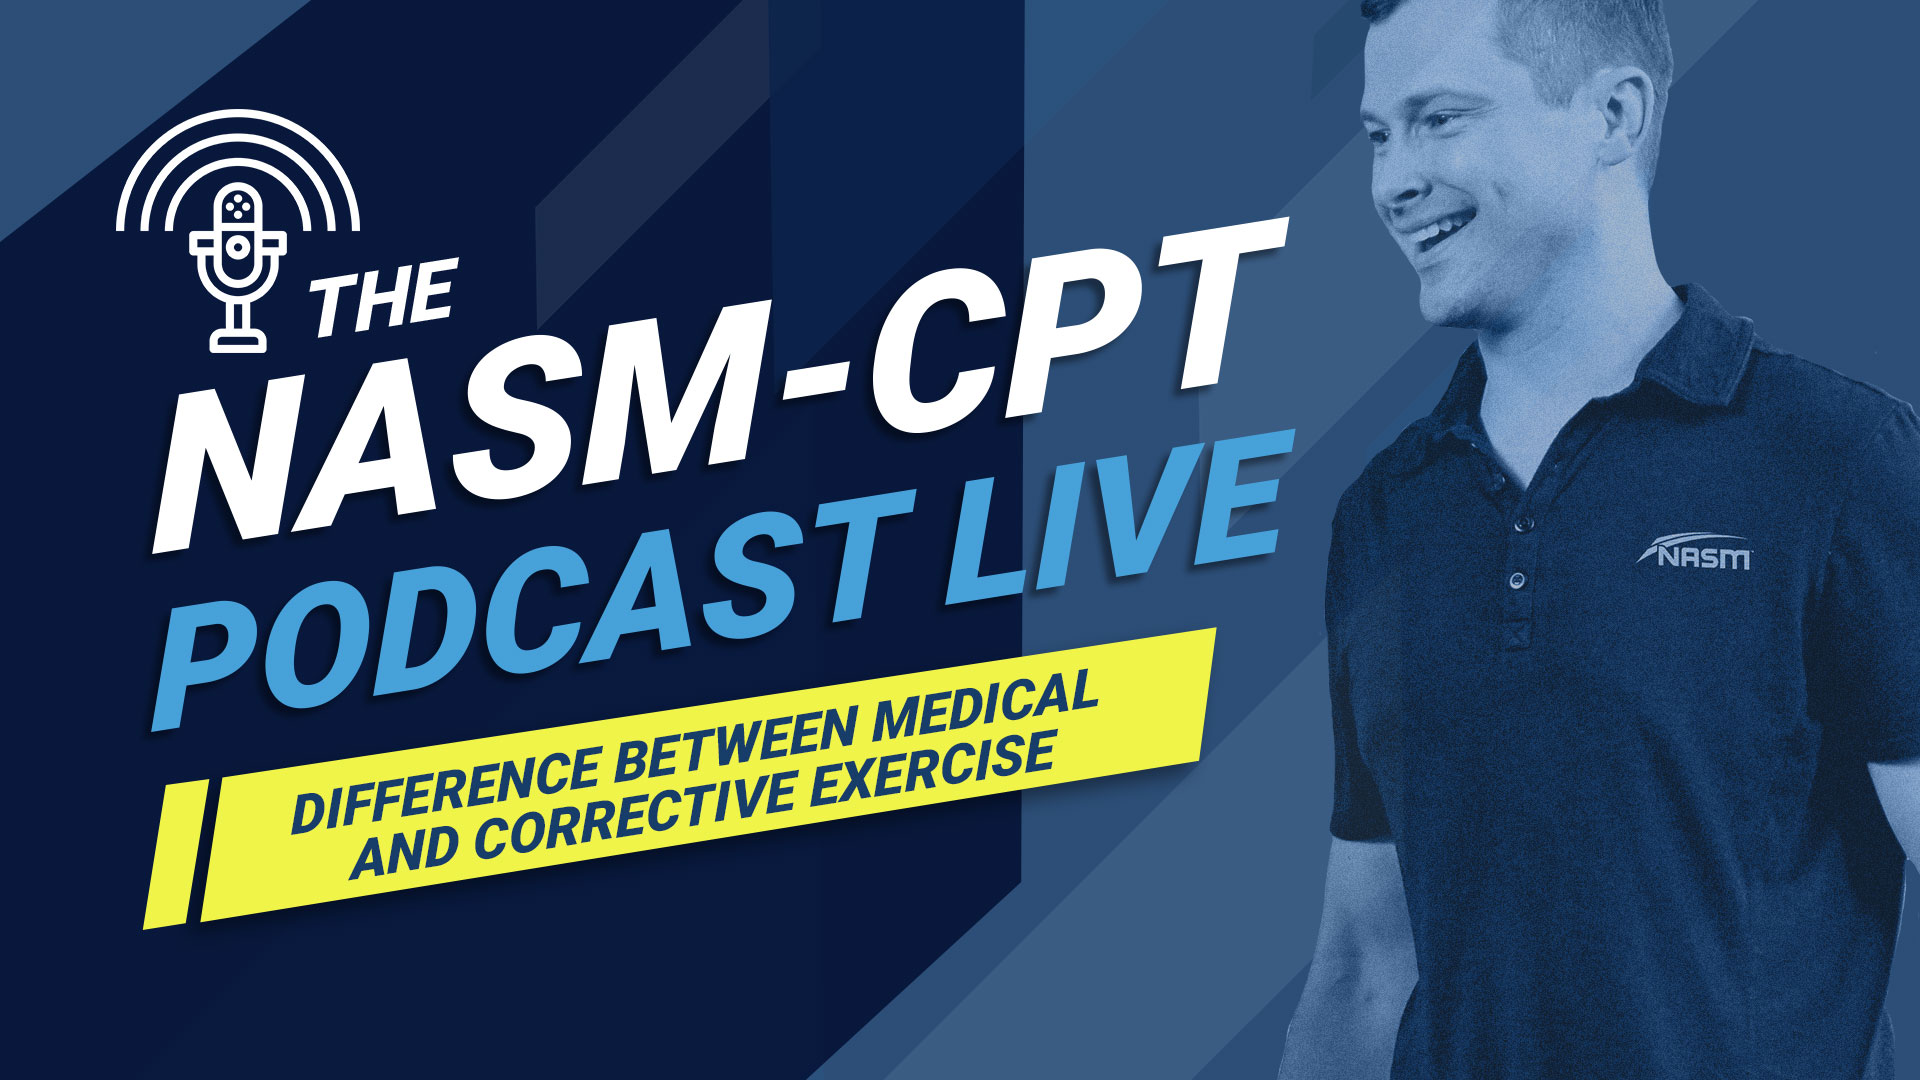 Sportstraining-Weightloss-CPT podcast on corrective versus medical exercise